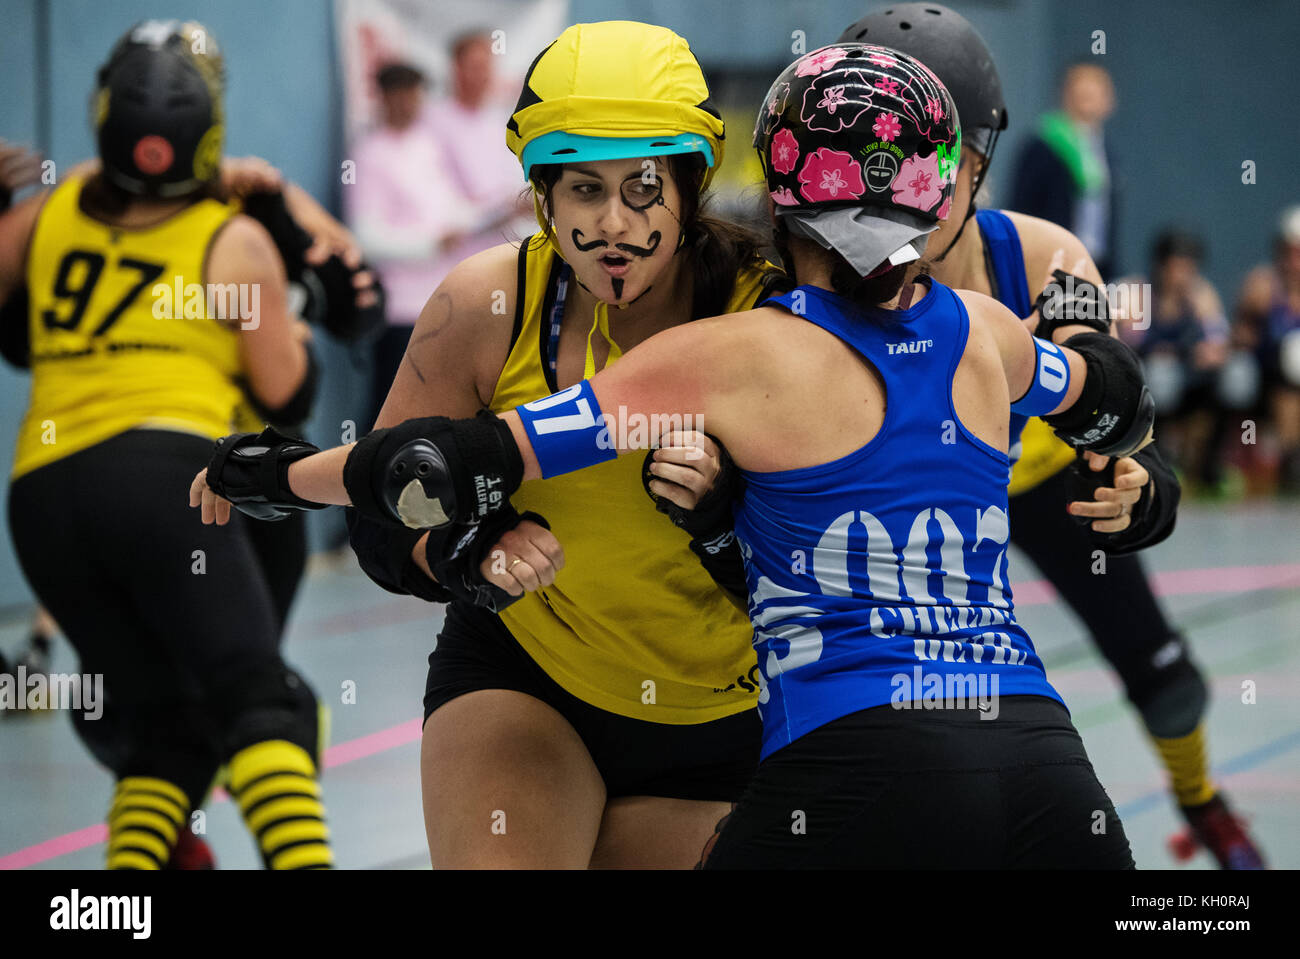 The jammer (yellow jersey, RocKArollers) attempting to overcome the block  by the Bembel Town Rollergirls (blue jersey, Frankfurt) during the 2nd Bundesliga  Roller Derby match between the Bembel Town Rollergirls and the